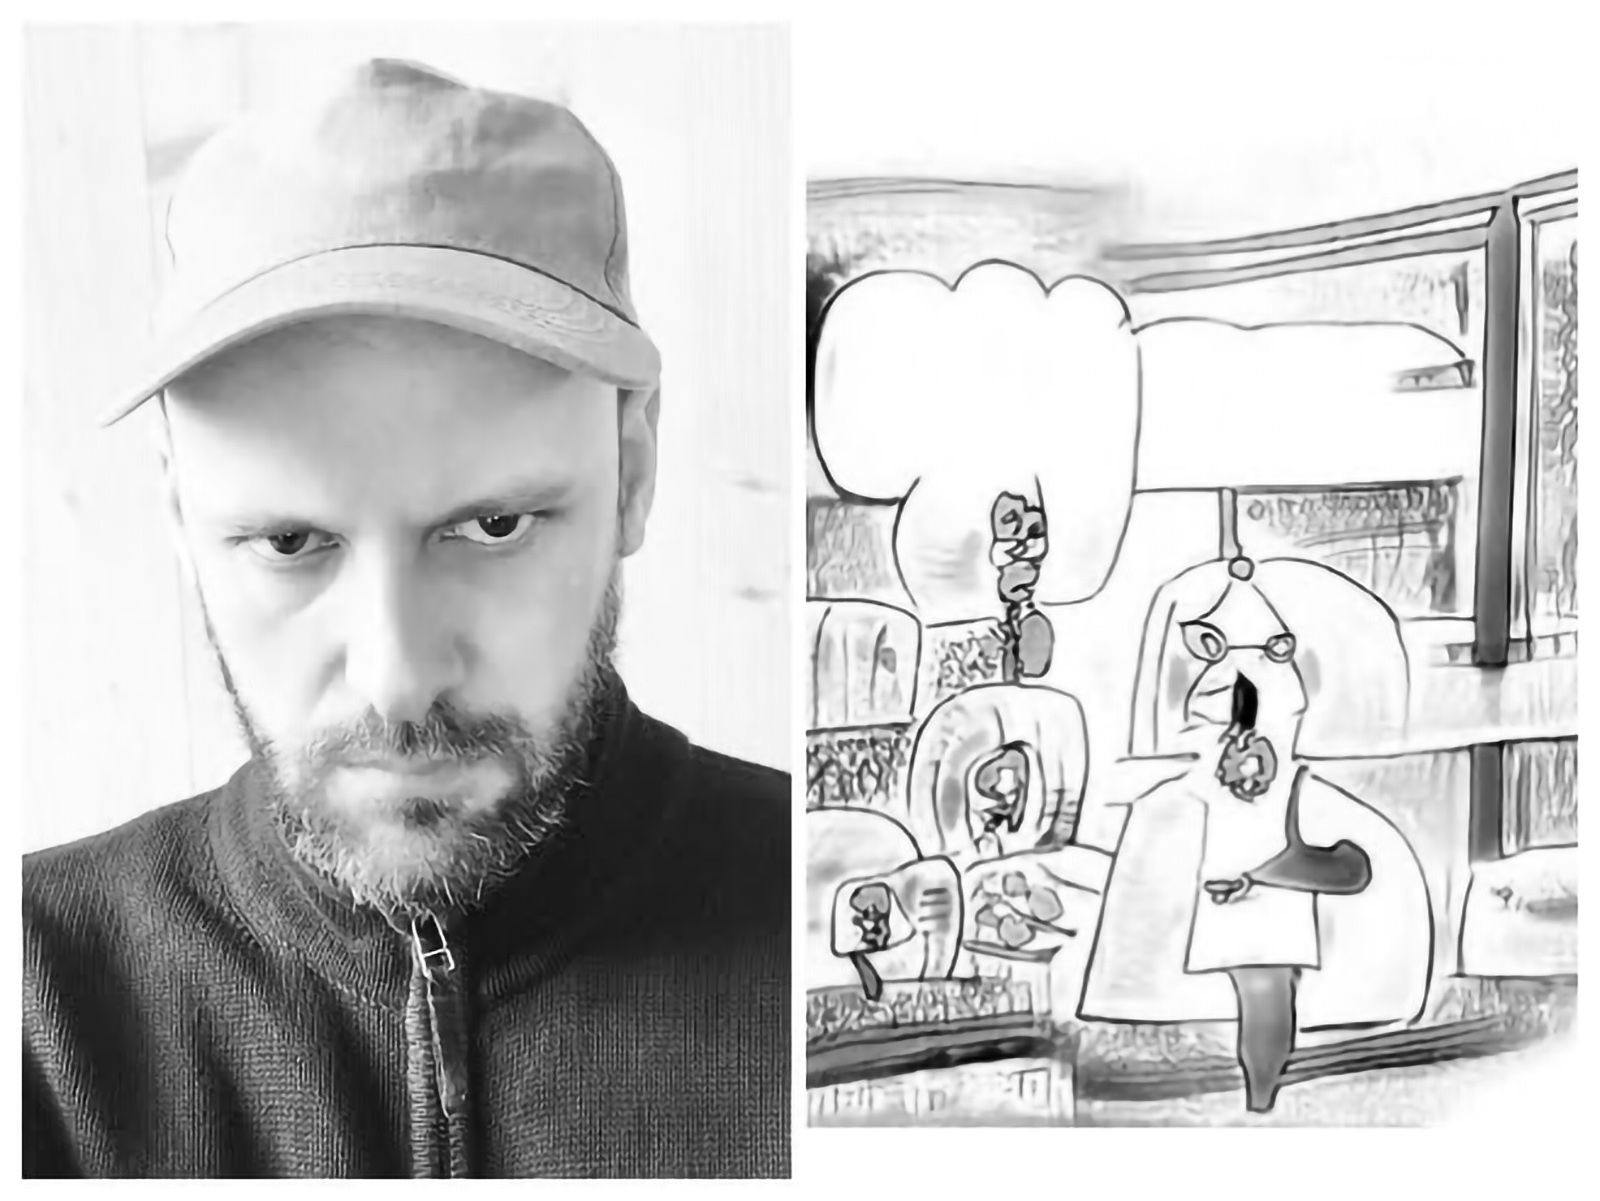 Black and white photo collage shows Ilan Manouach (wearing a beard and a baseball hat) on the left – and somewhat undefined comic characters in a surreal setting on the right.